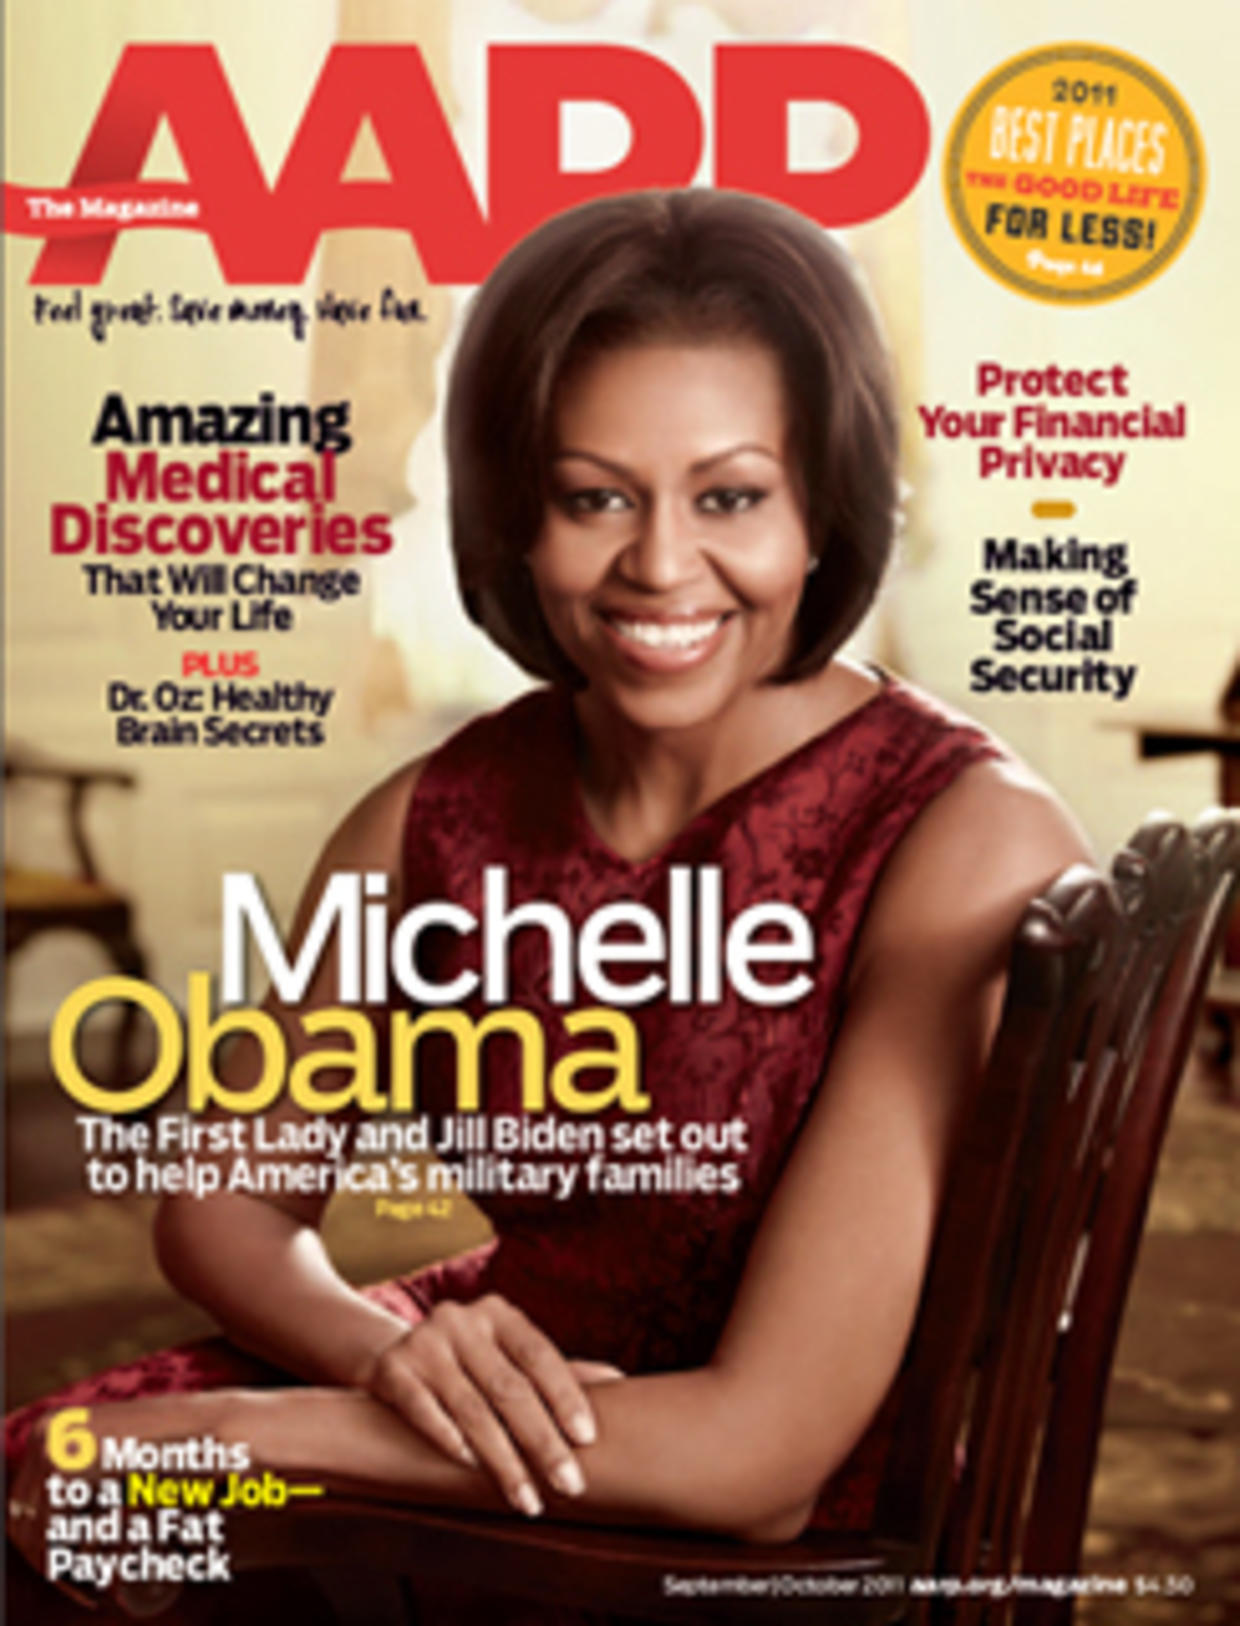 Michelle Obama on the cover of AARP magazine CBS News